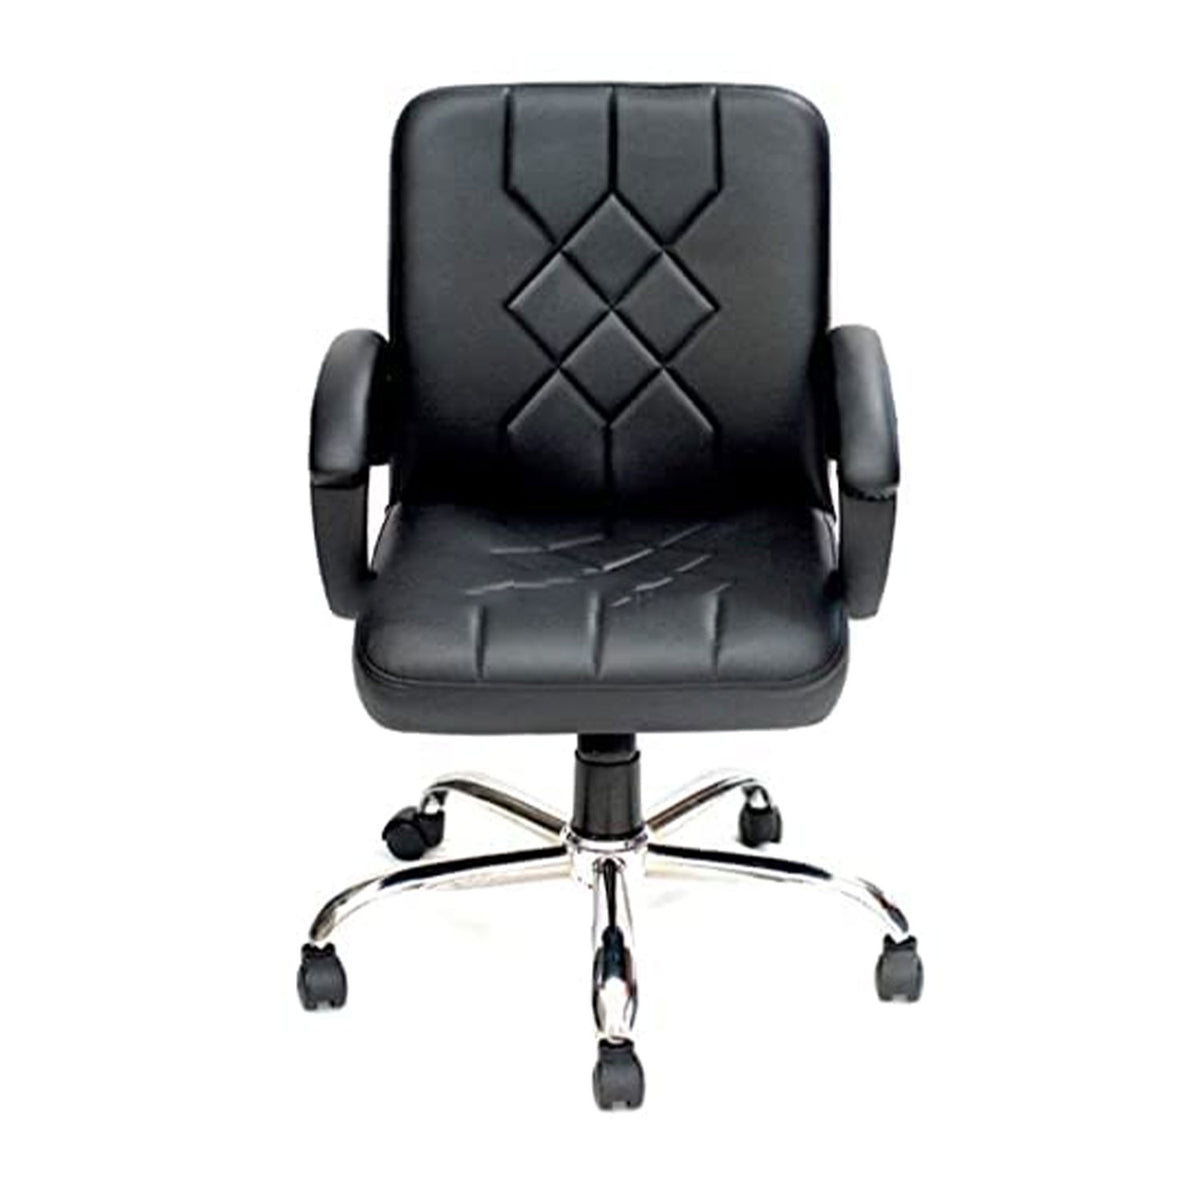 SmileSellers Office Chair for Computer Table,Office Chair/Study Chair/revolving Chair/Computer Chair for Home Work Executive mid Back